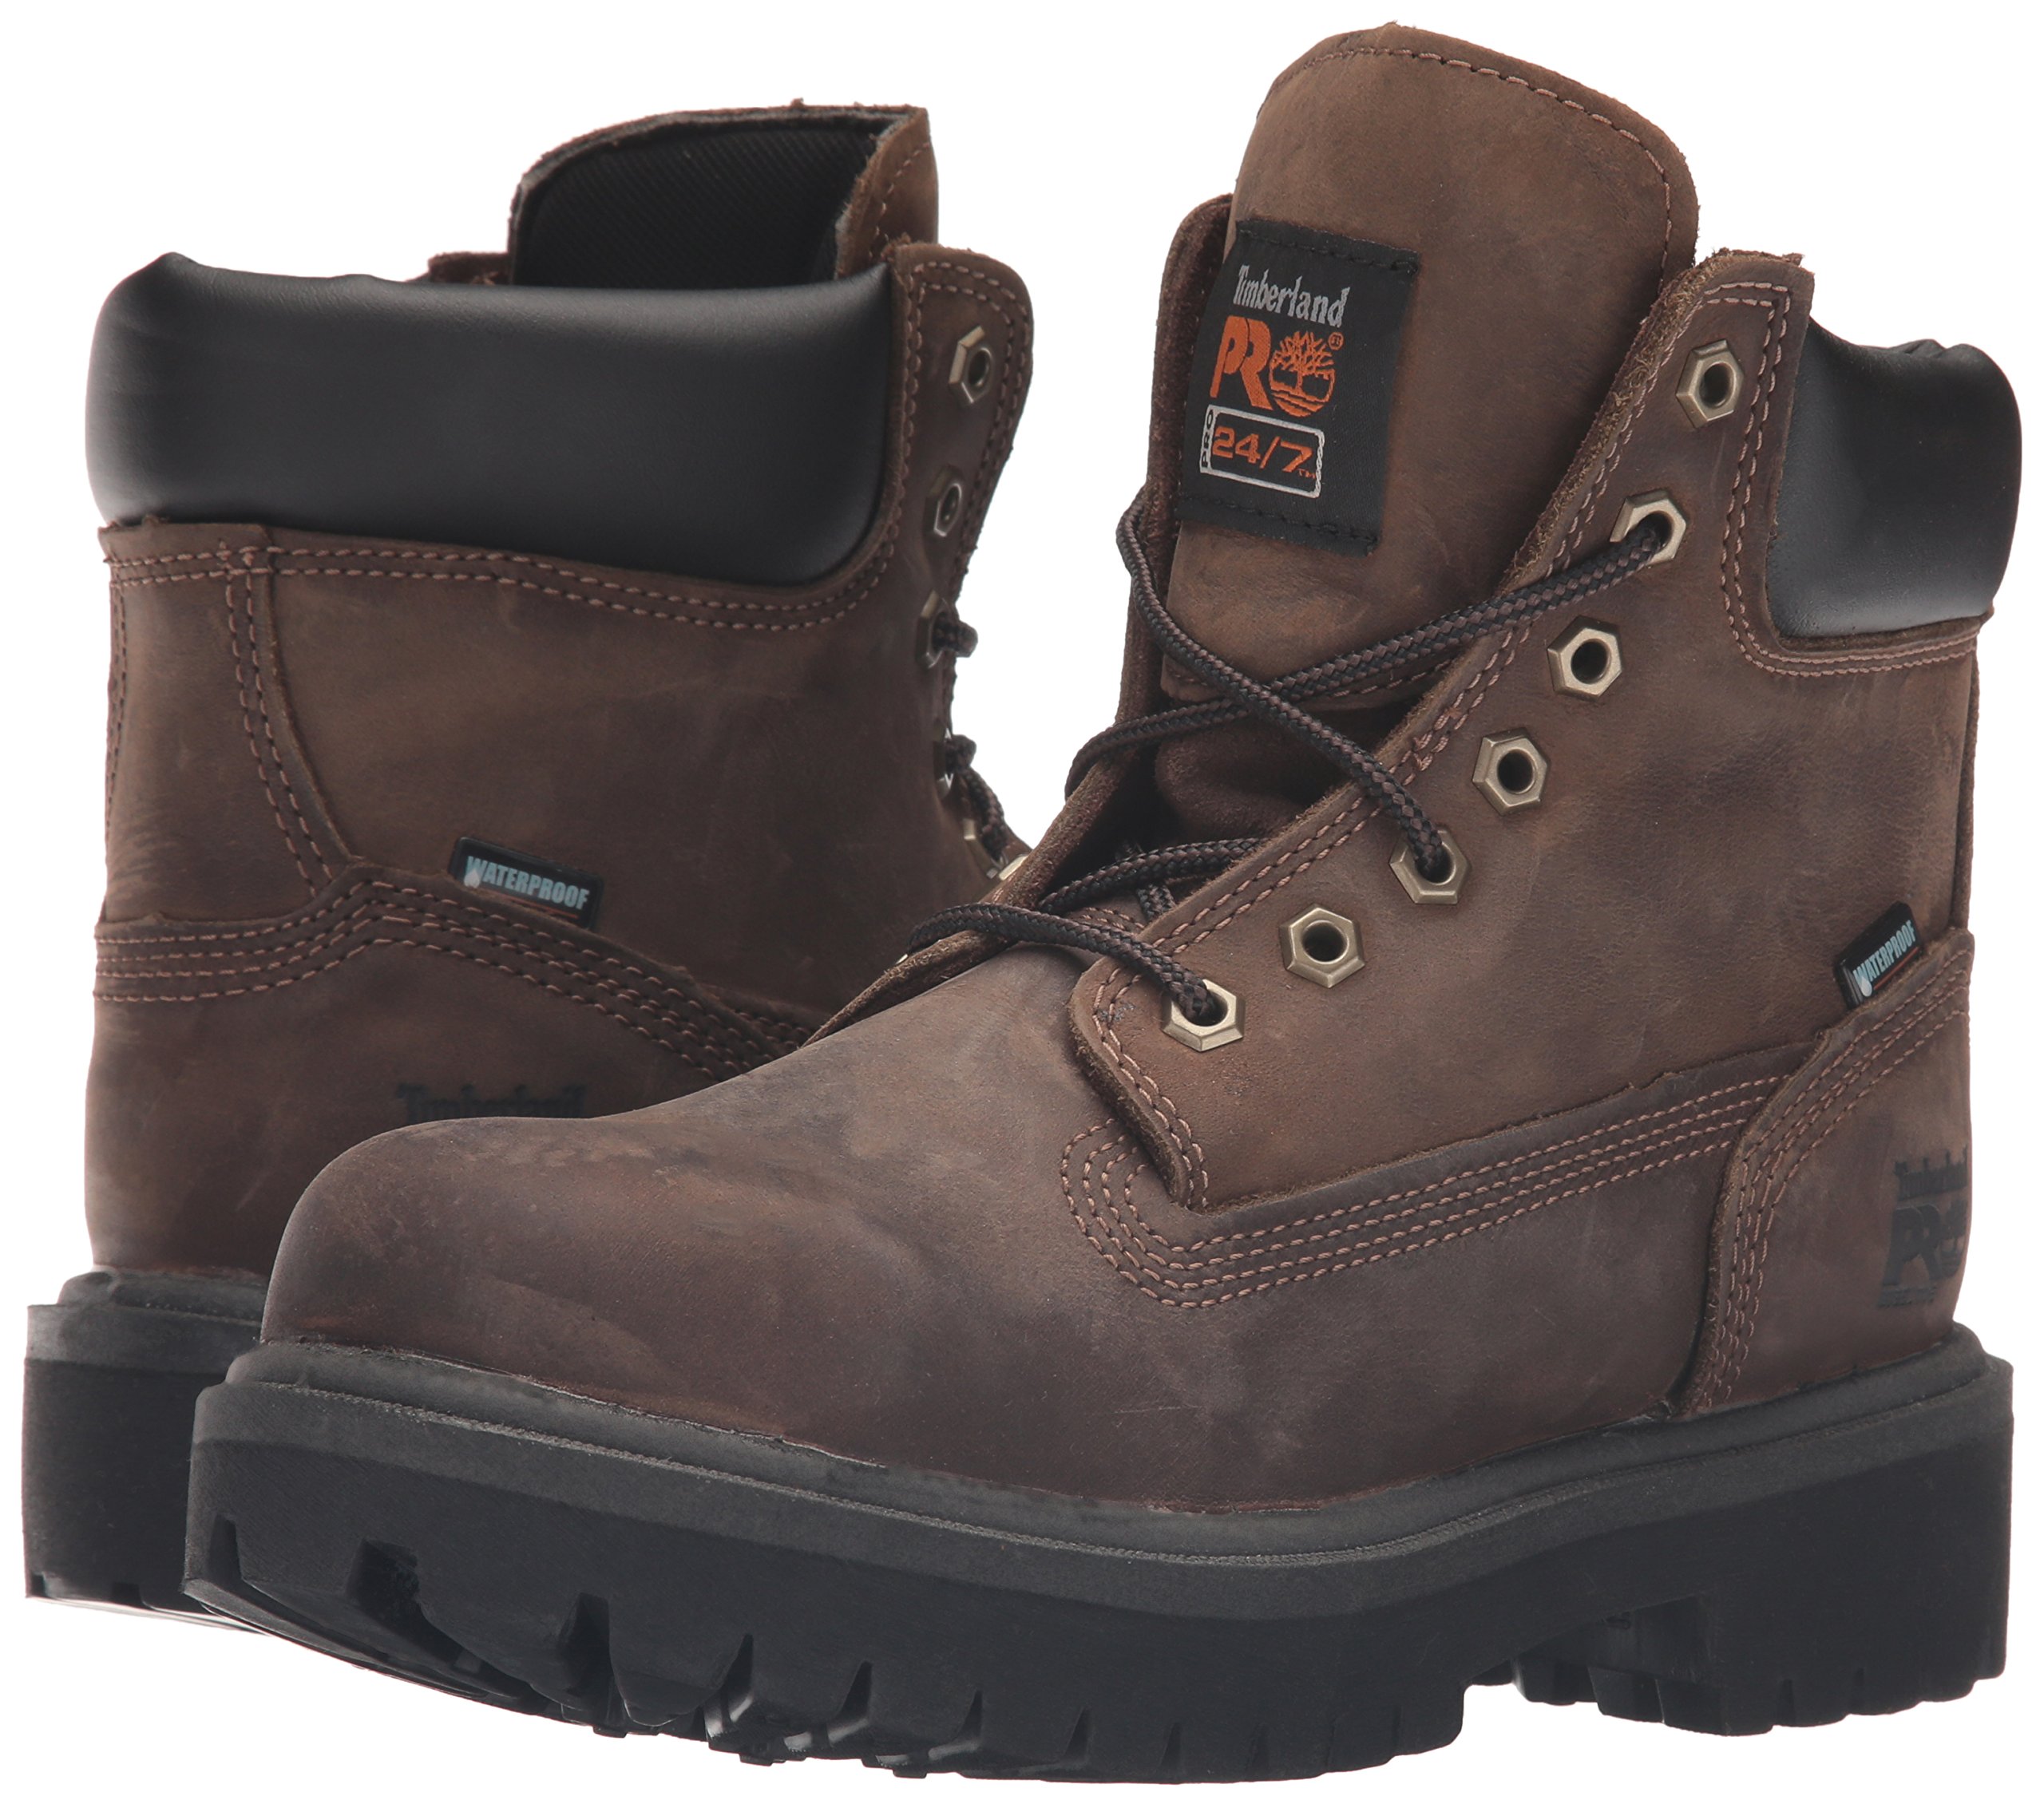 Timberland PRO Men's Direct Attach 6 Inch Steel Safety Toe Waterproof Insulated Work Boot